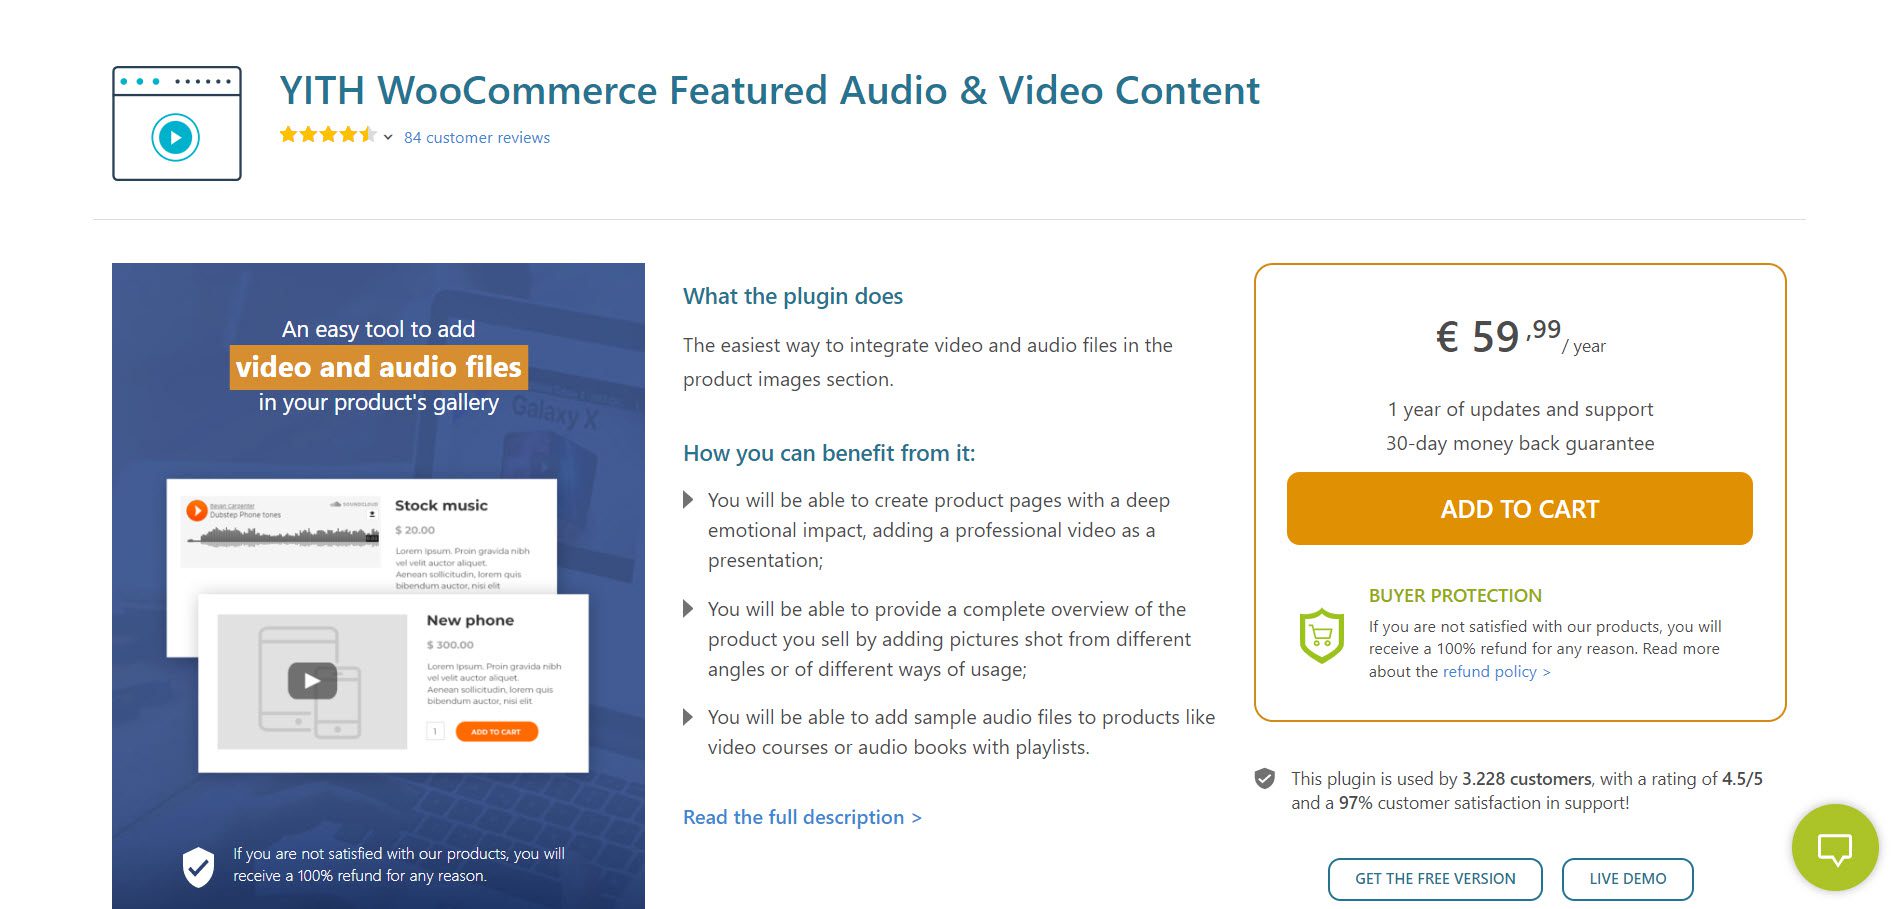 YITH woocommerce featured audio and video content